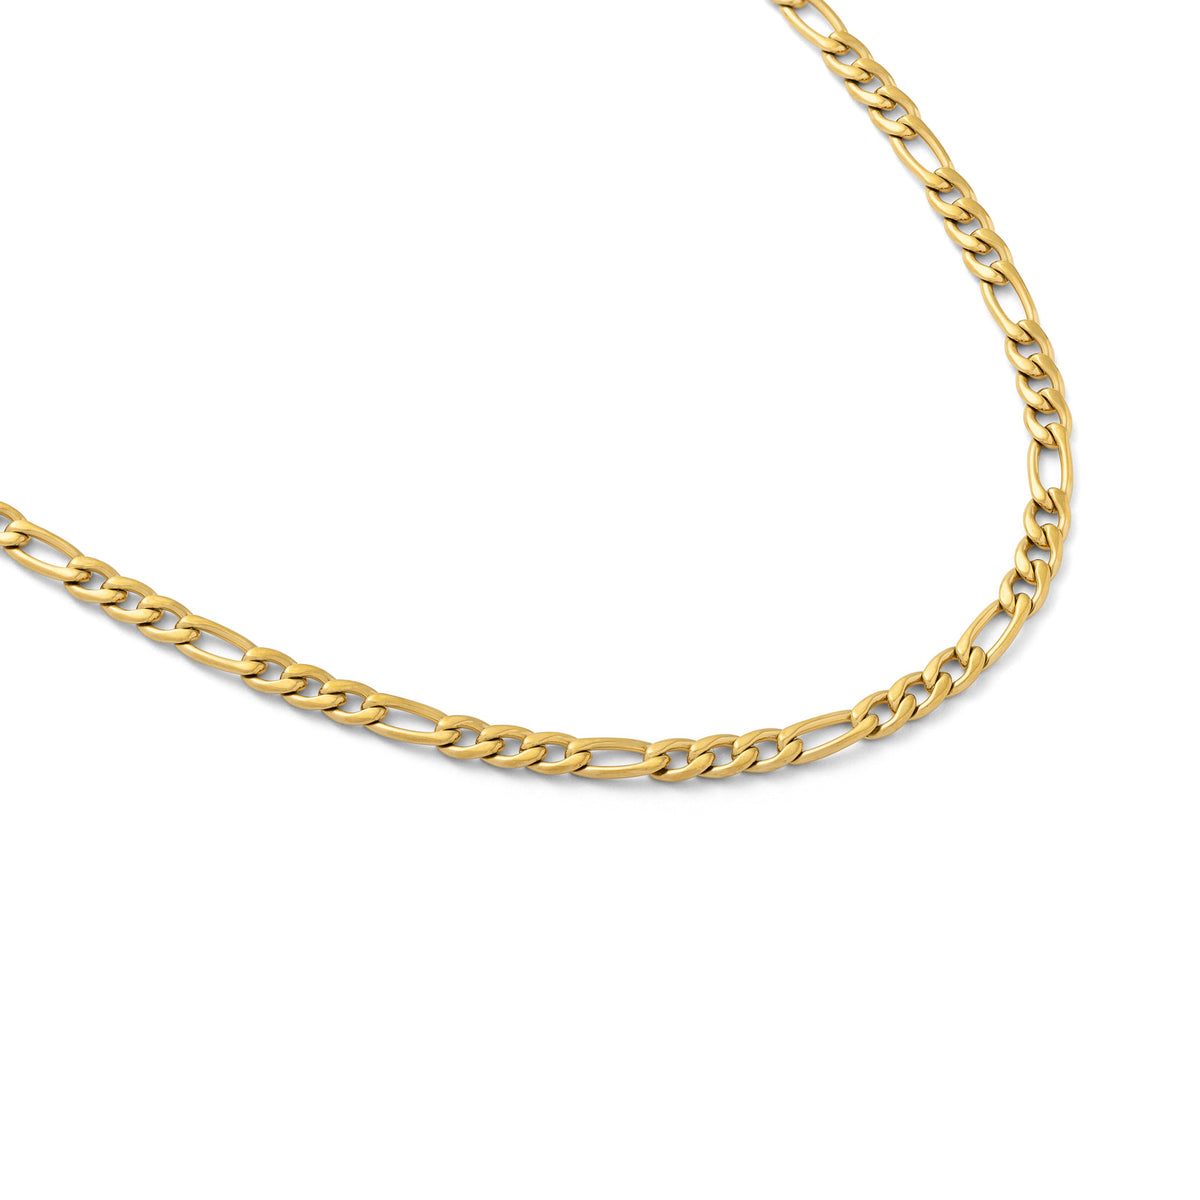 Thin Figaro link necklace in gold